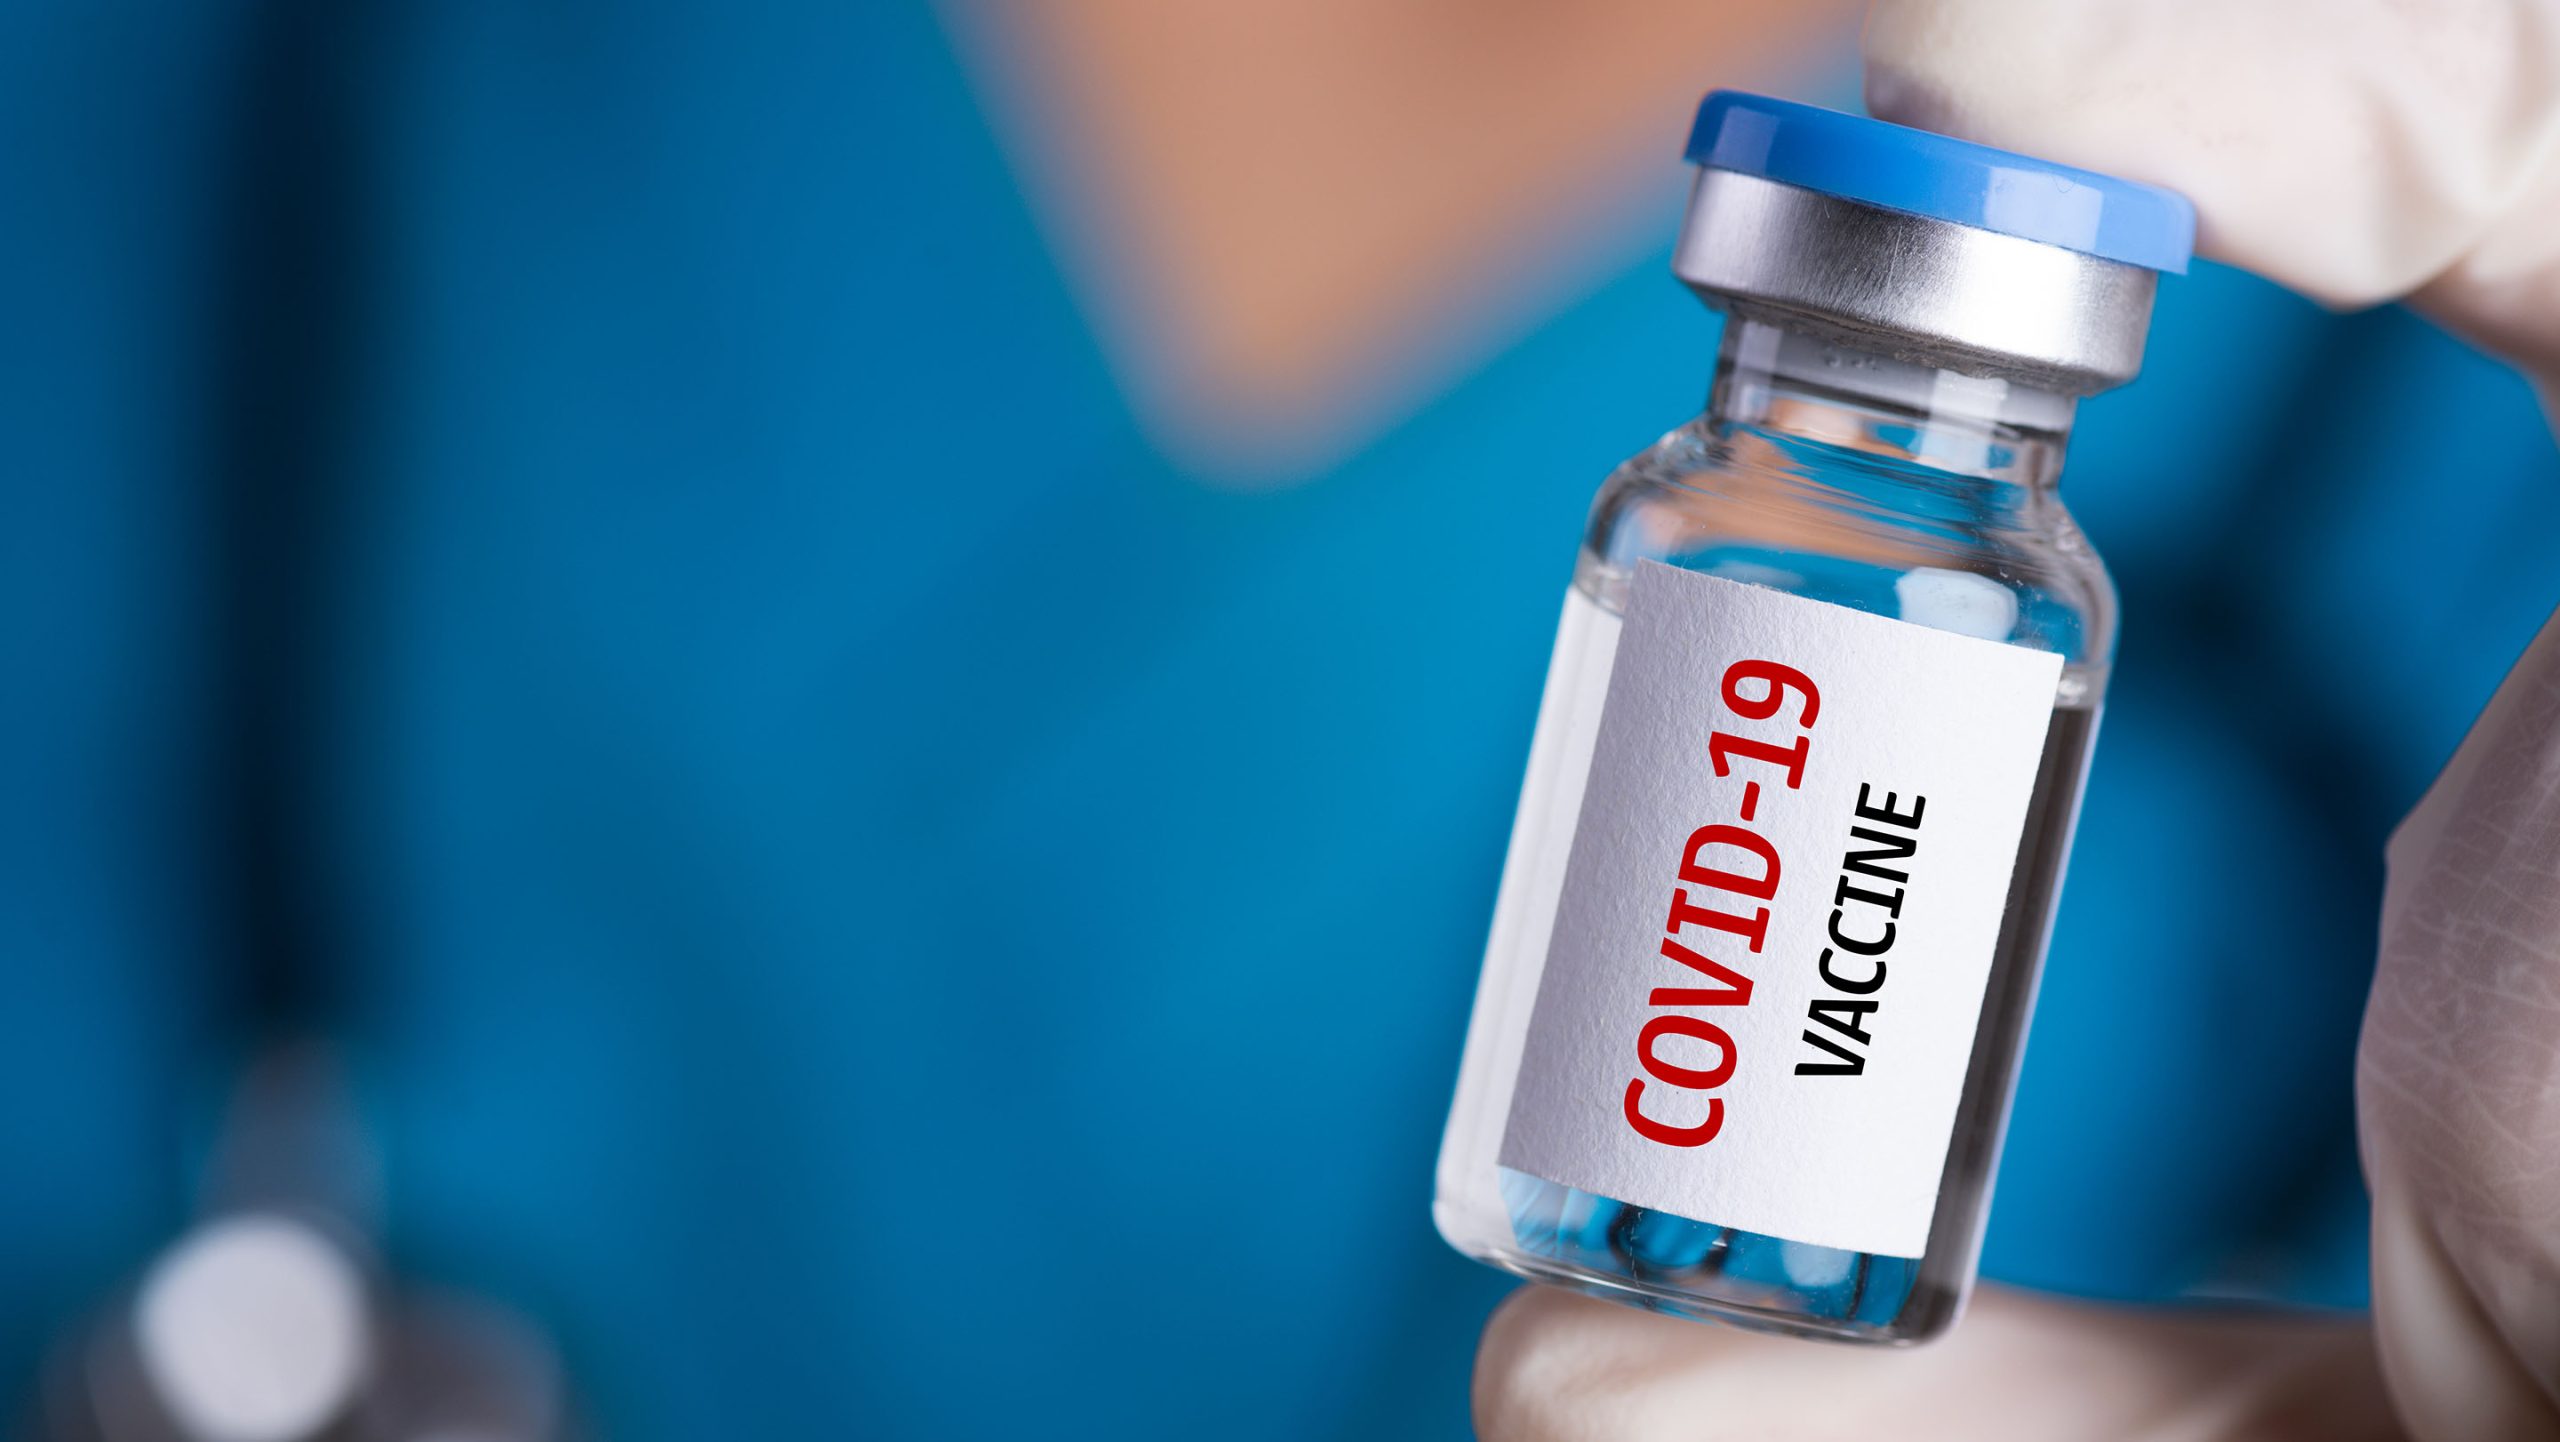 Corona vaccine clinical trial continues at MIH